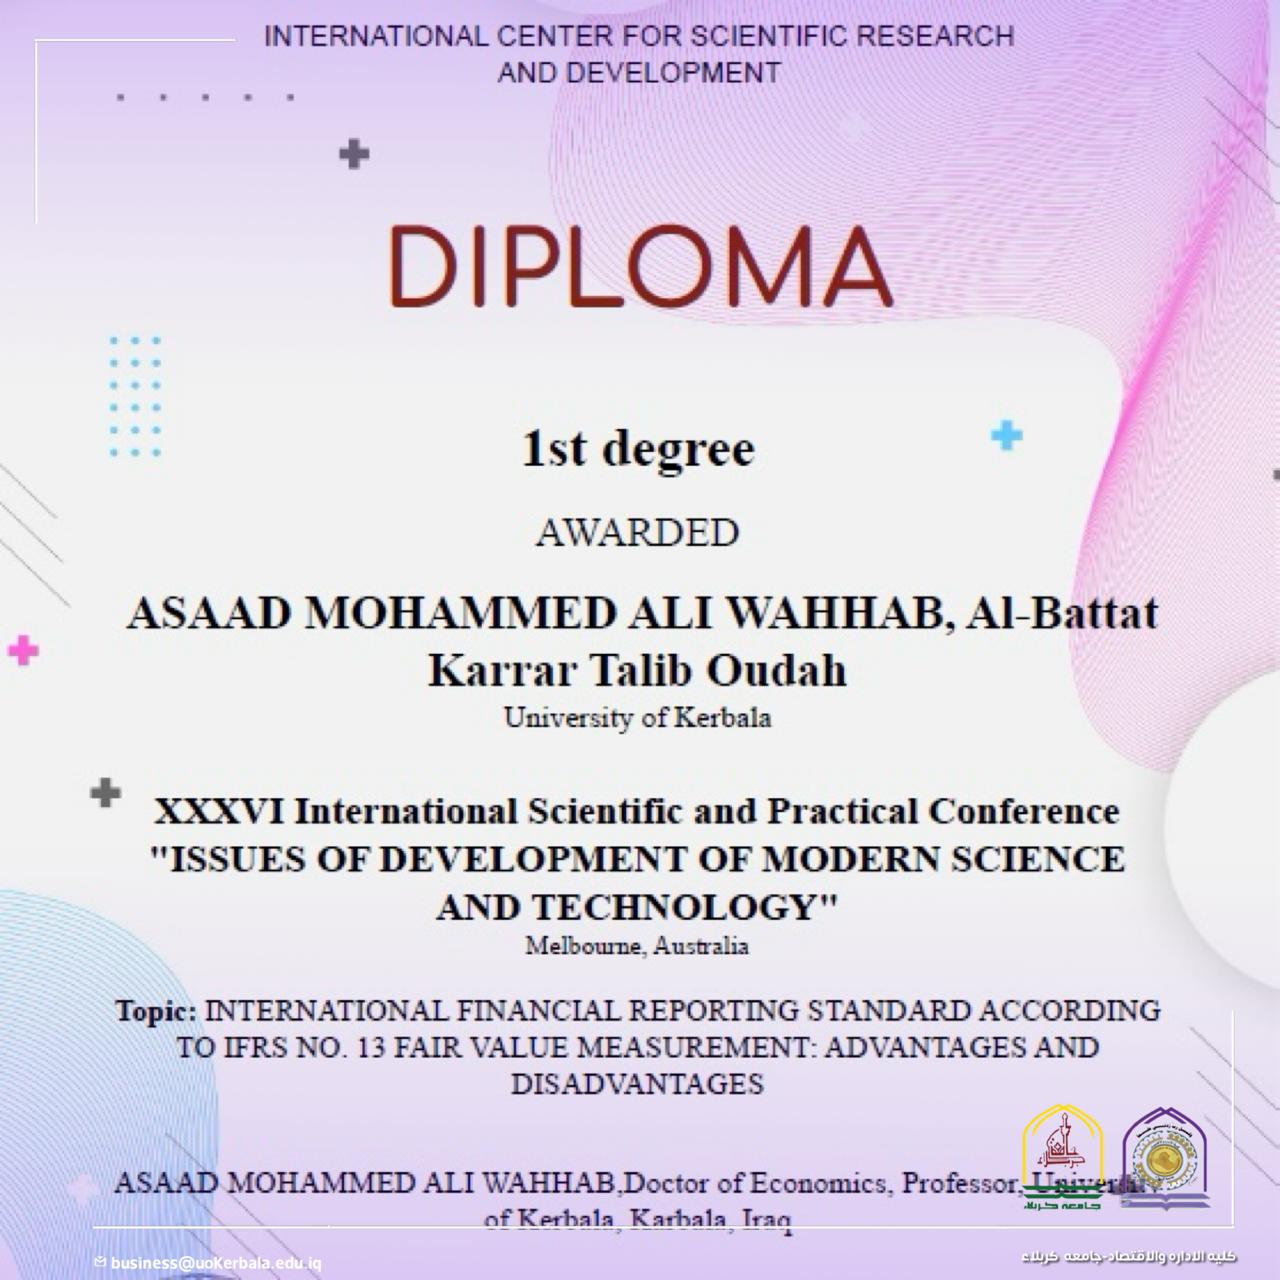 You are currently viewing A Researcher From Kerbala University Present A Scientific Research For International Financial Reporting Standard According To Ifrs No. 13 Fair Value Measurement: Advantages And Disadvantages